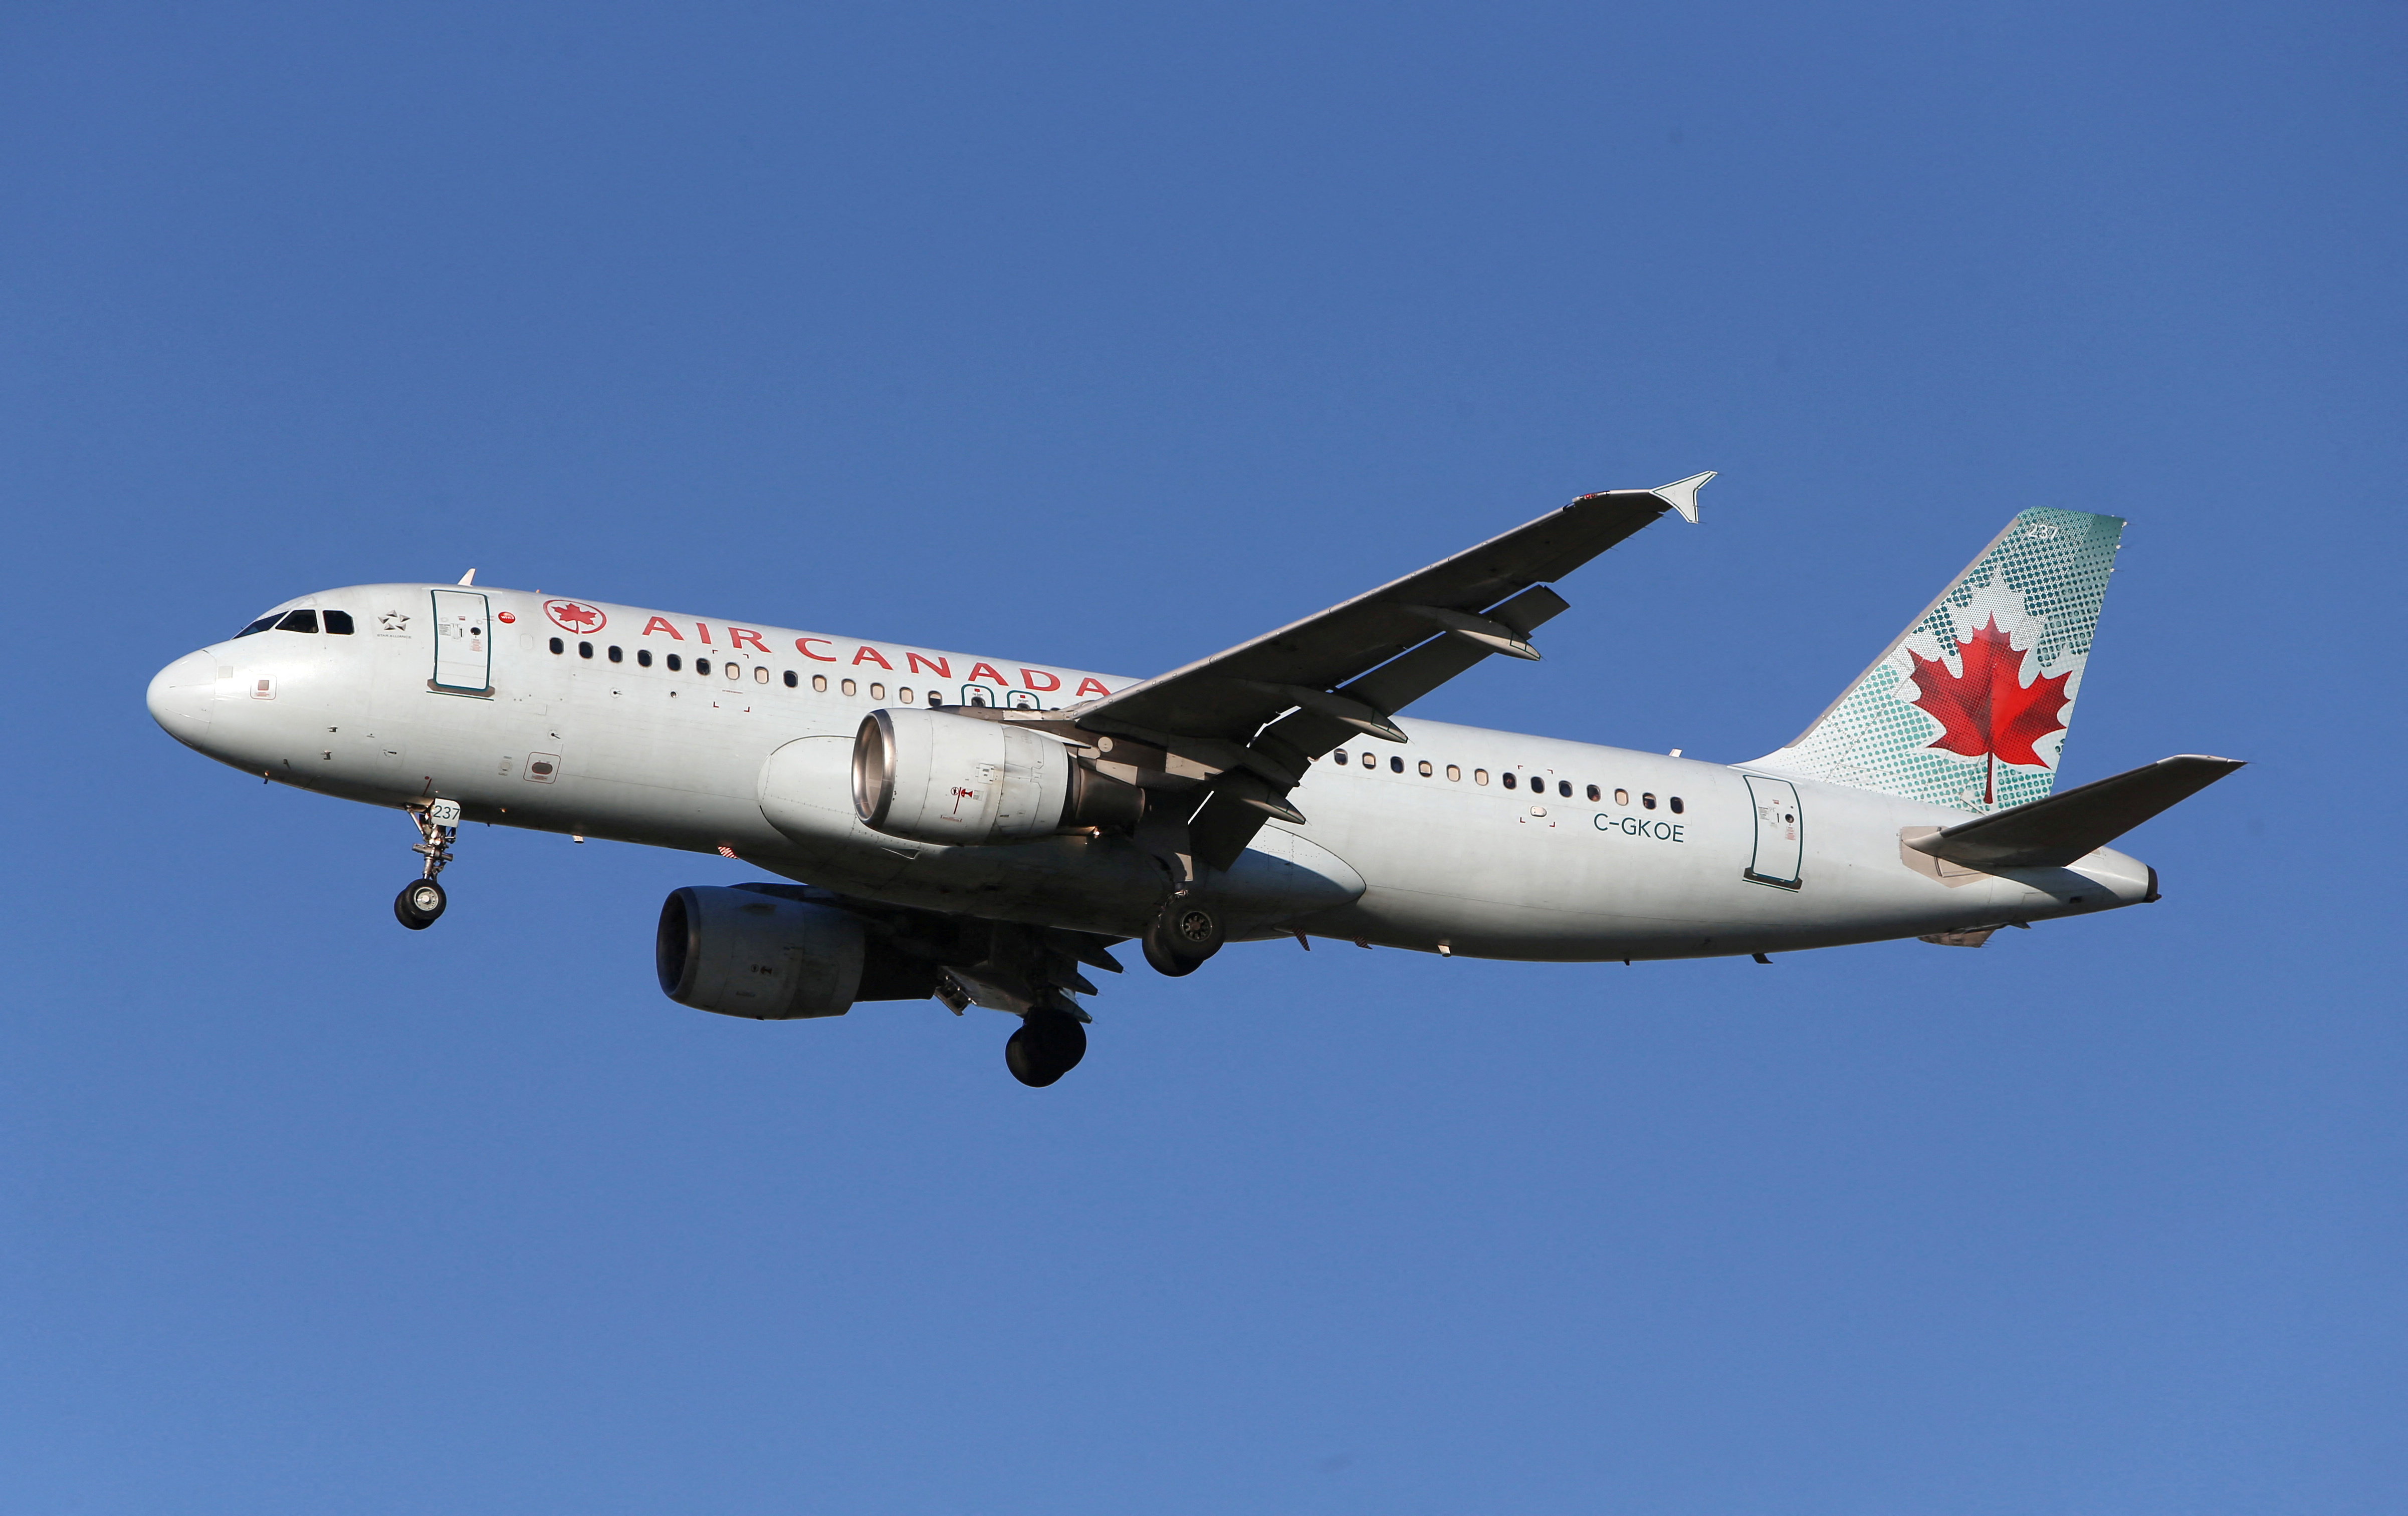 An Air Canada Airbus A320 airplane prepares to land at Vancouver's international airport in Richmond,